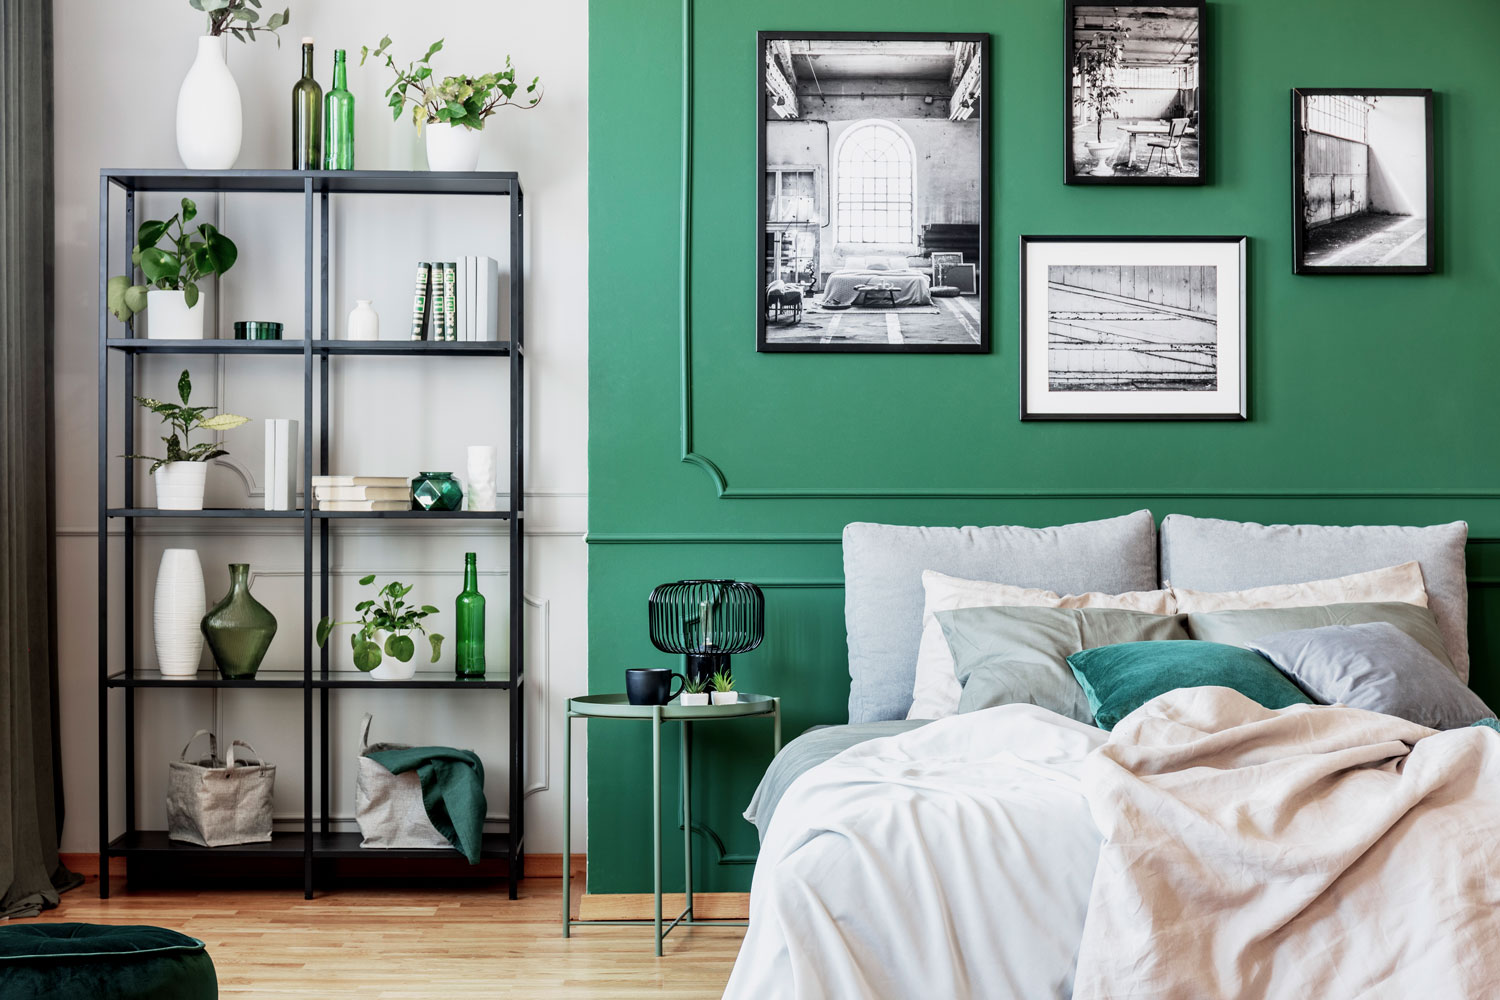 Gorgeous modern green and white bedroom with canvas paintings on the accent wall and white beddings